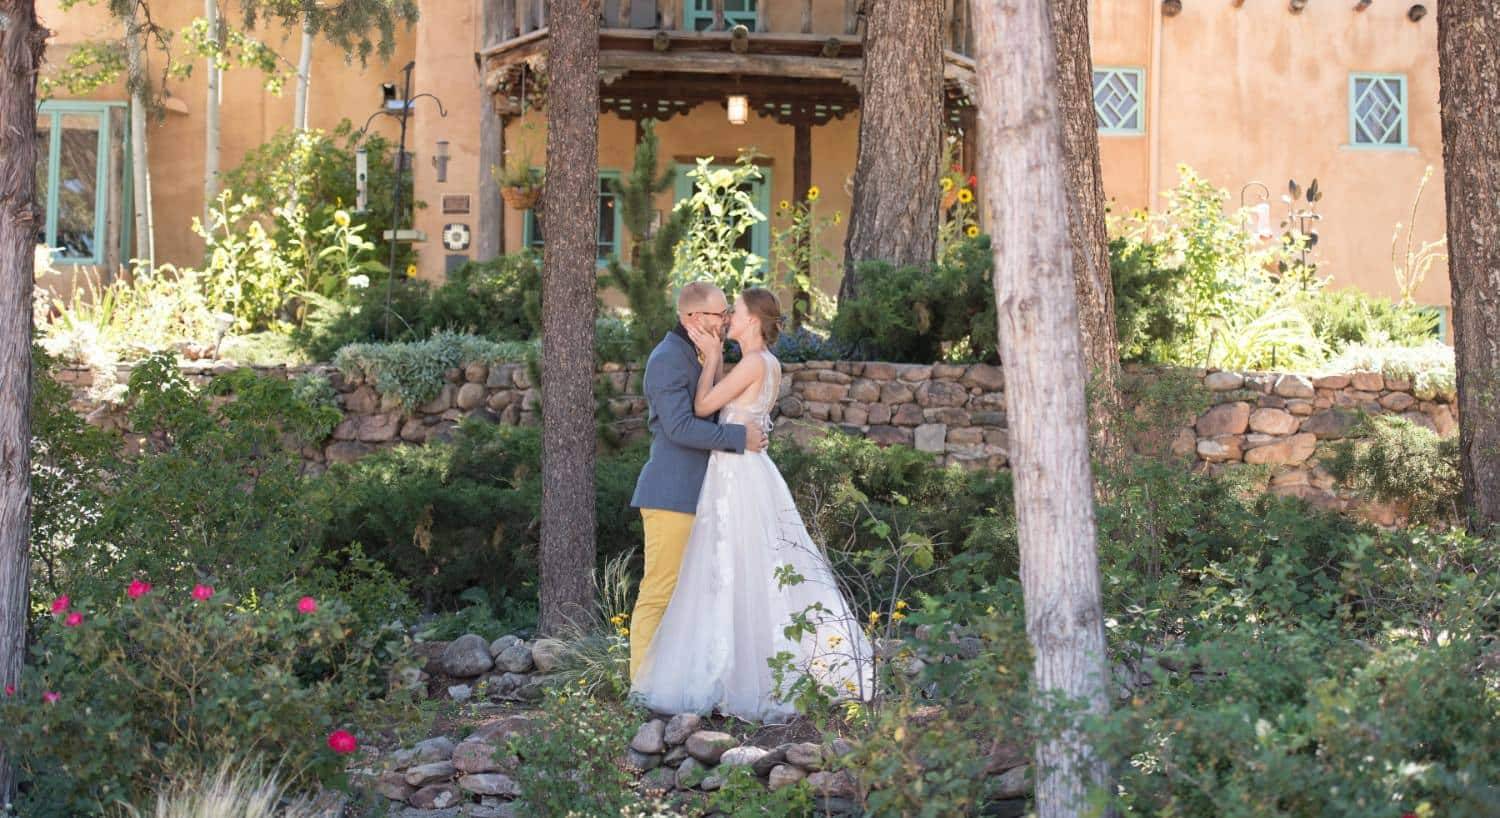 Bride and groom kissing each other standing in a garden outside of the property surrounded by green bushes and vegetation